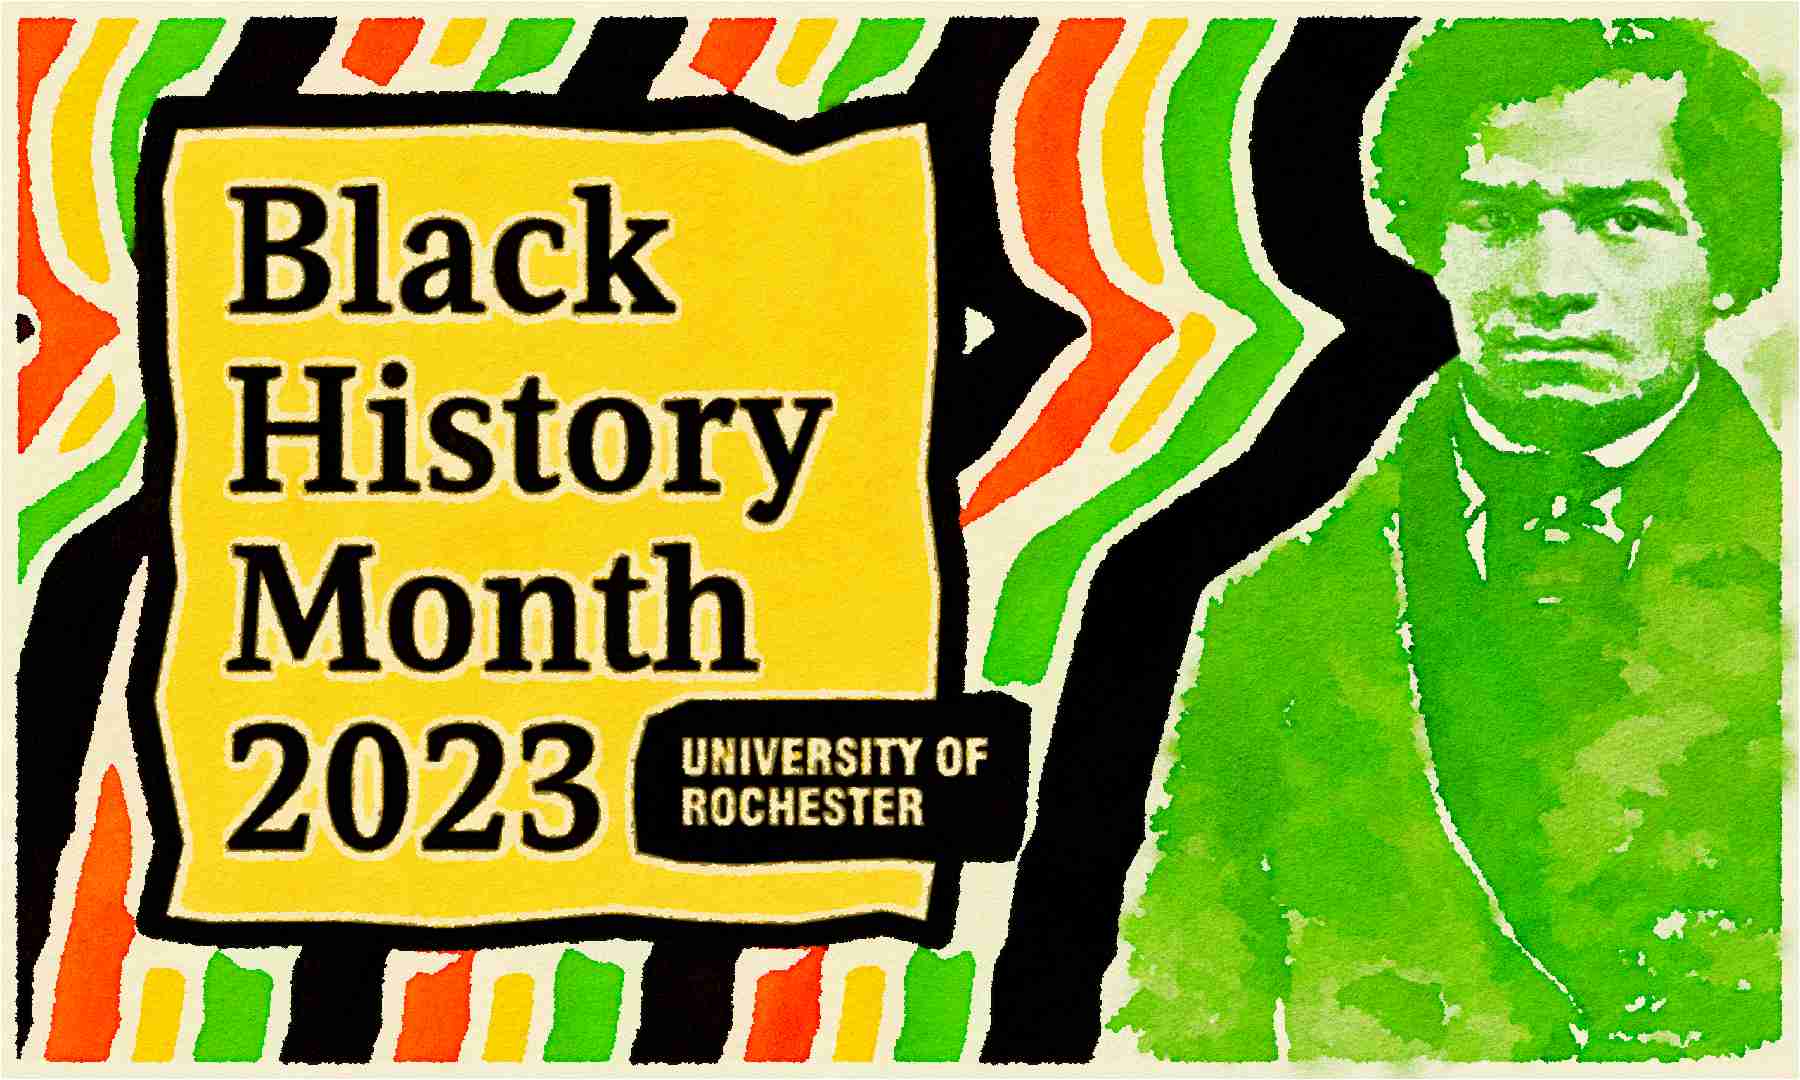 Illustration features black, green, yellow, and red colors alongside text that says "Black History Month 2023: University of Rochester" and a green rendering of Frederick Douglass.